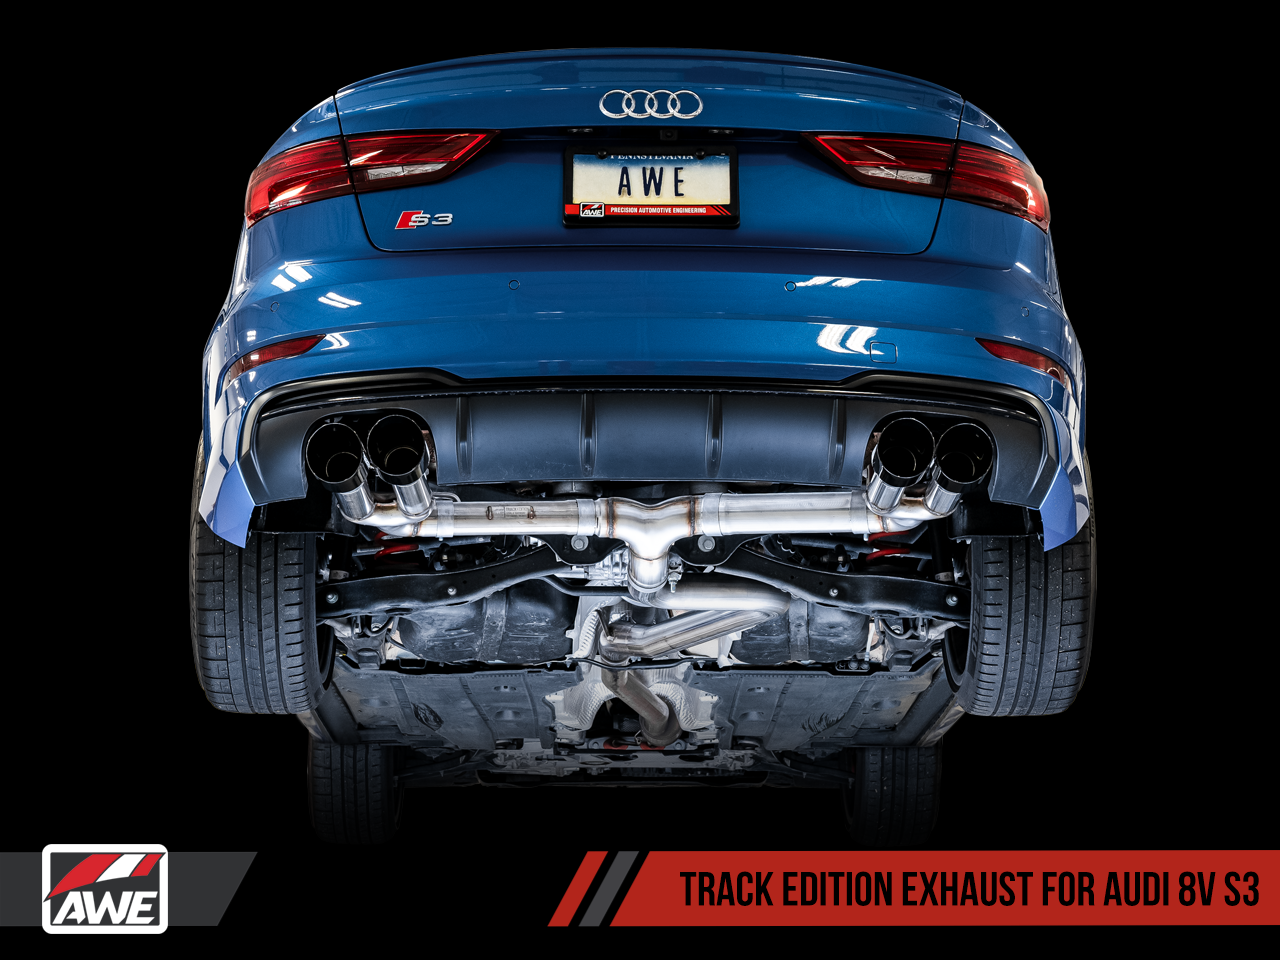 AWE Track Edition Catback Exhaust for 8V S3